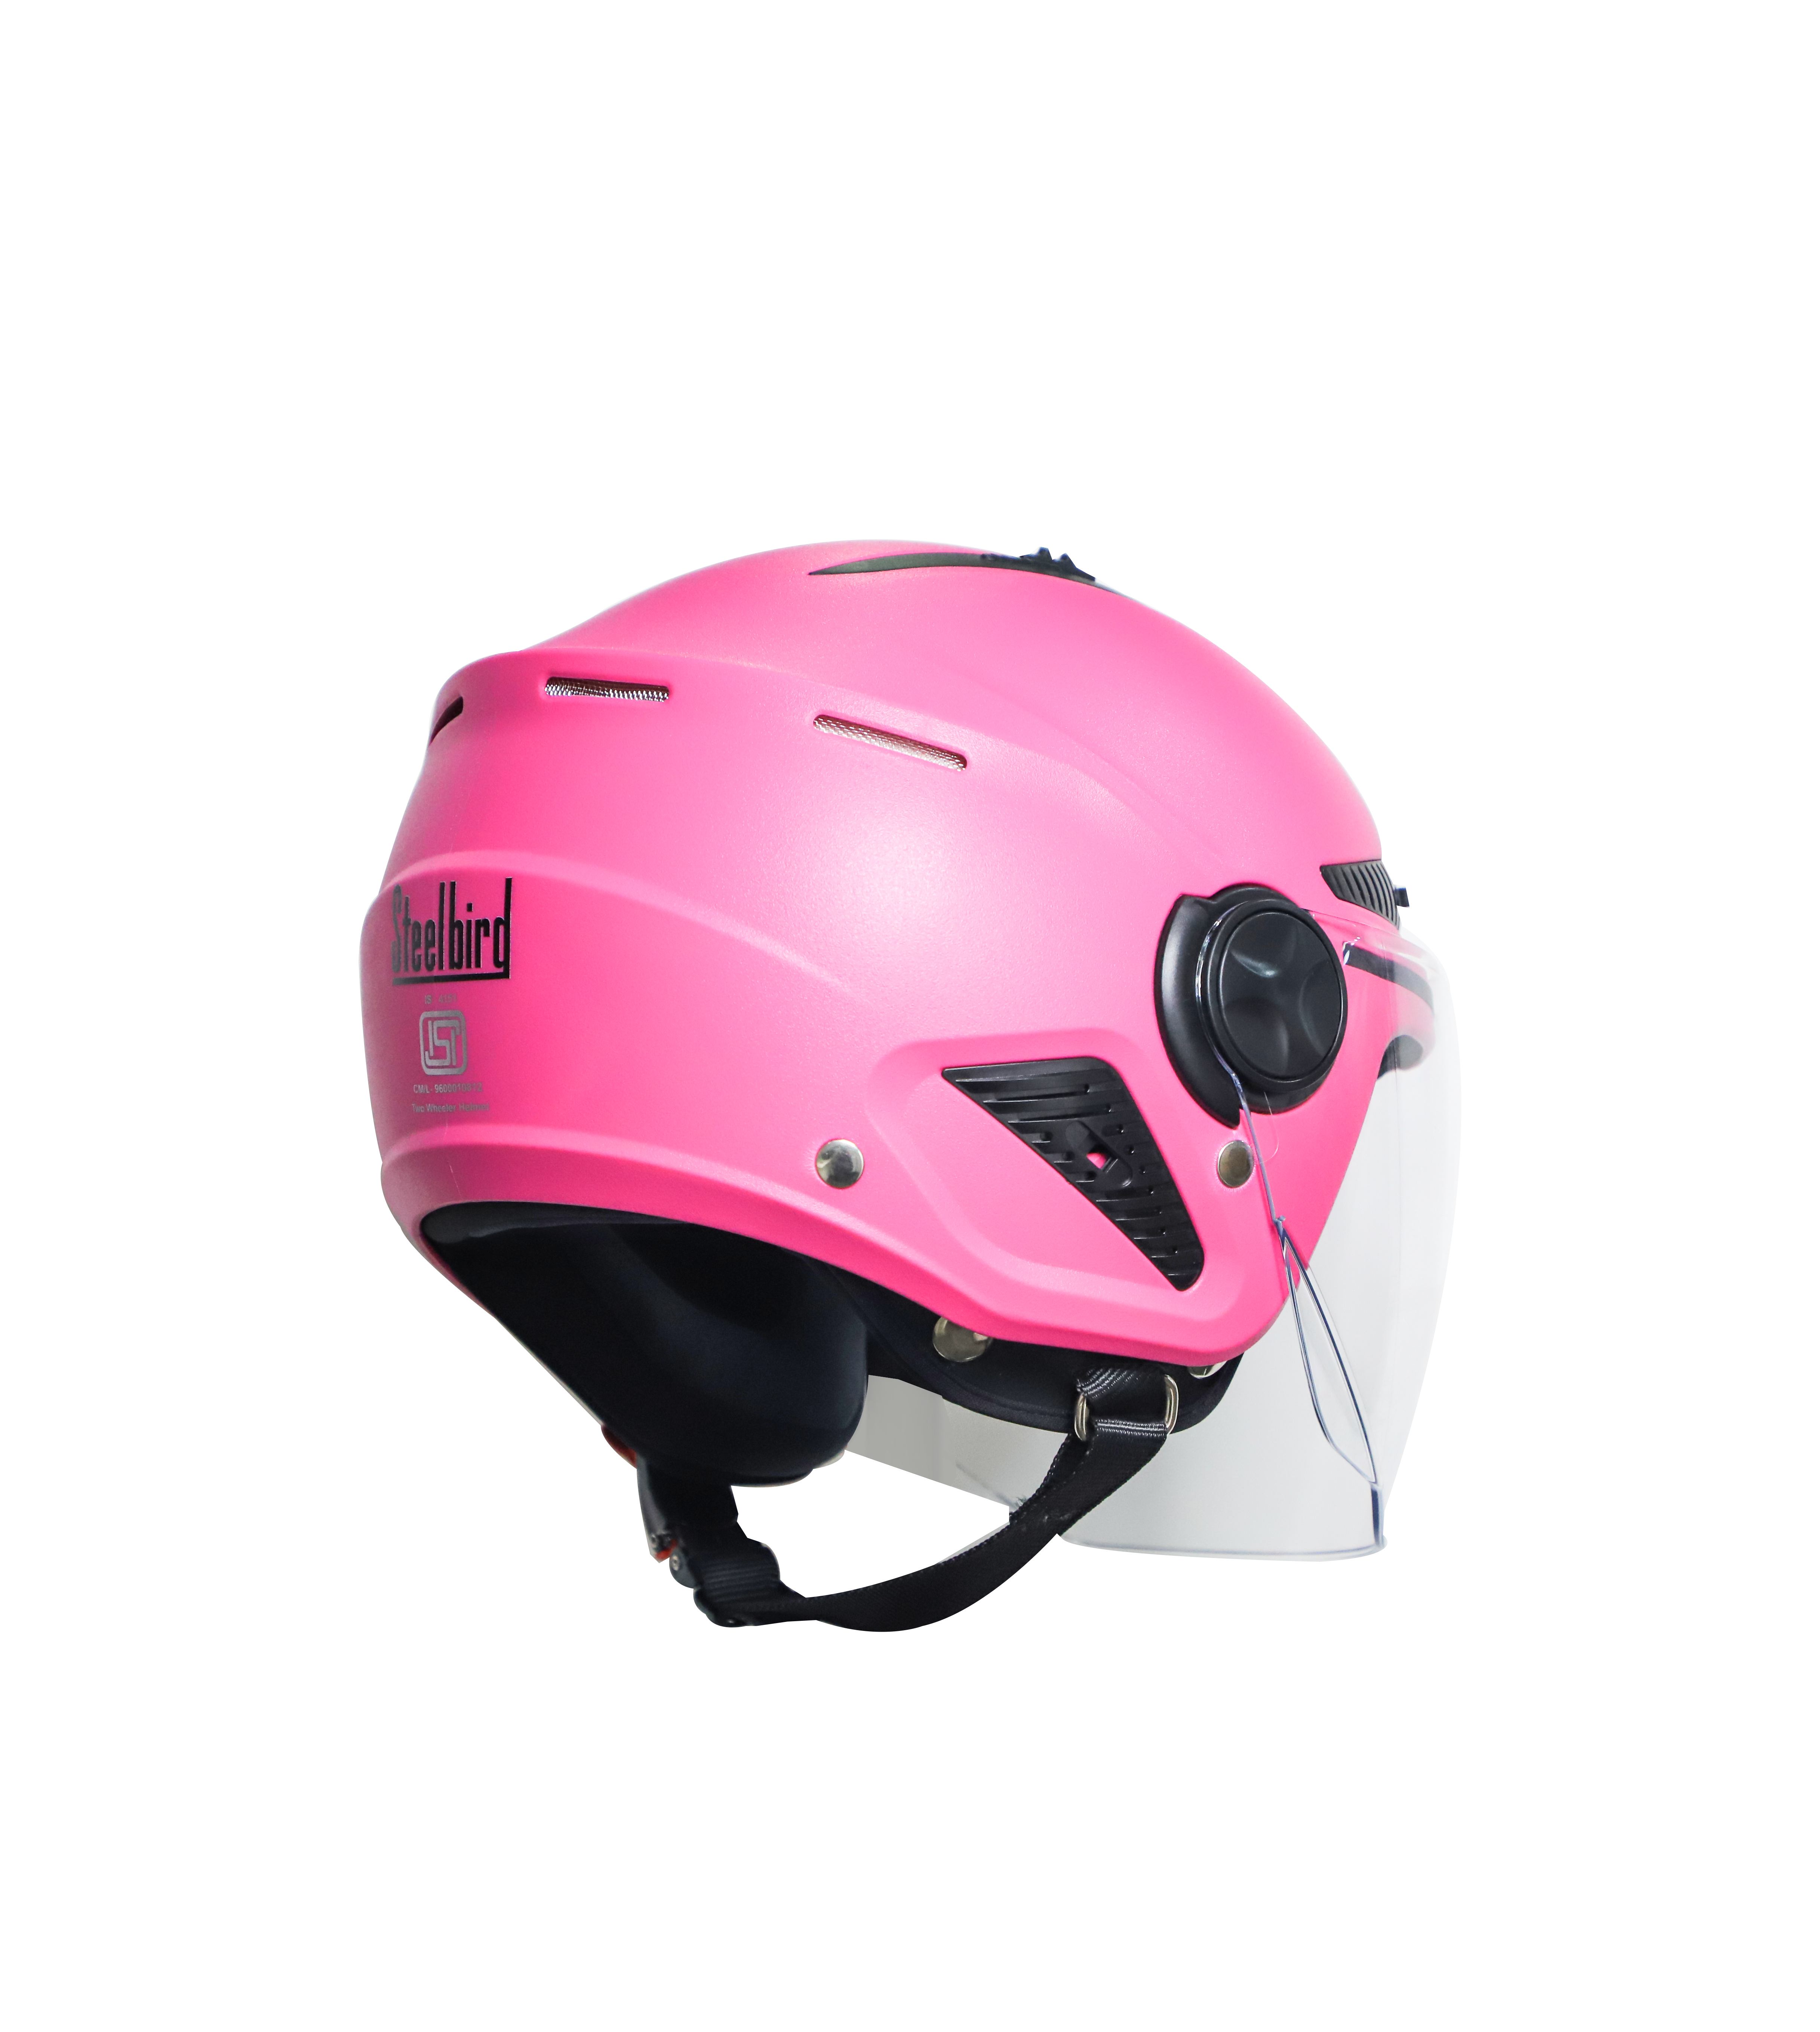 Steelbird SBH-24 Boxx Dashing ISI Certified Open Face Helmet For Men And Women (Pink With Clear Visor)